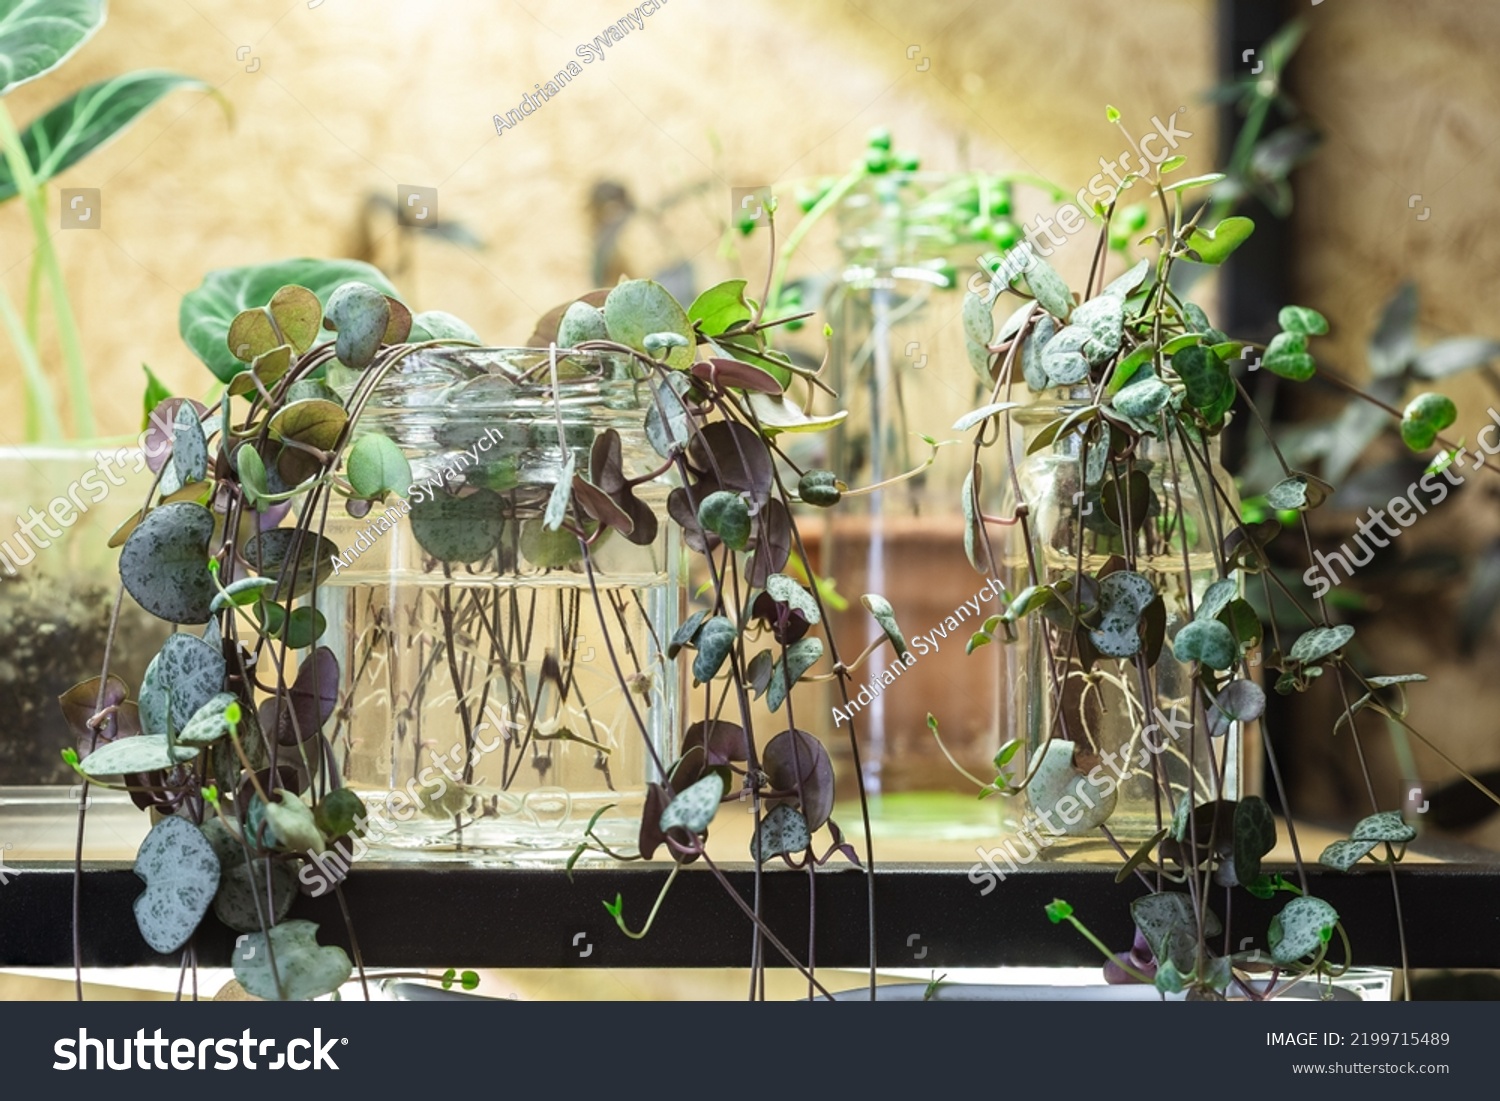 Ceropegia Woodii houseplant Propagation in water. String of Hearts plant stem cuttings in glass jar on the shelf propagating and growing new roots under artificial light #2199715489